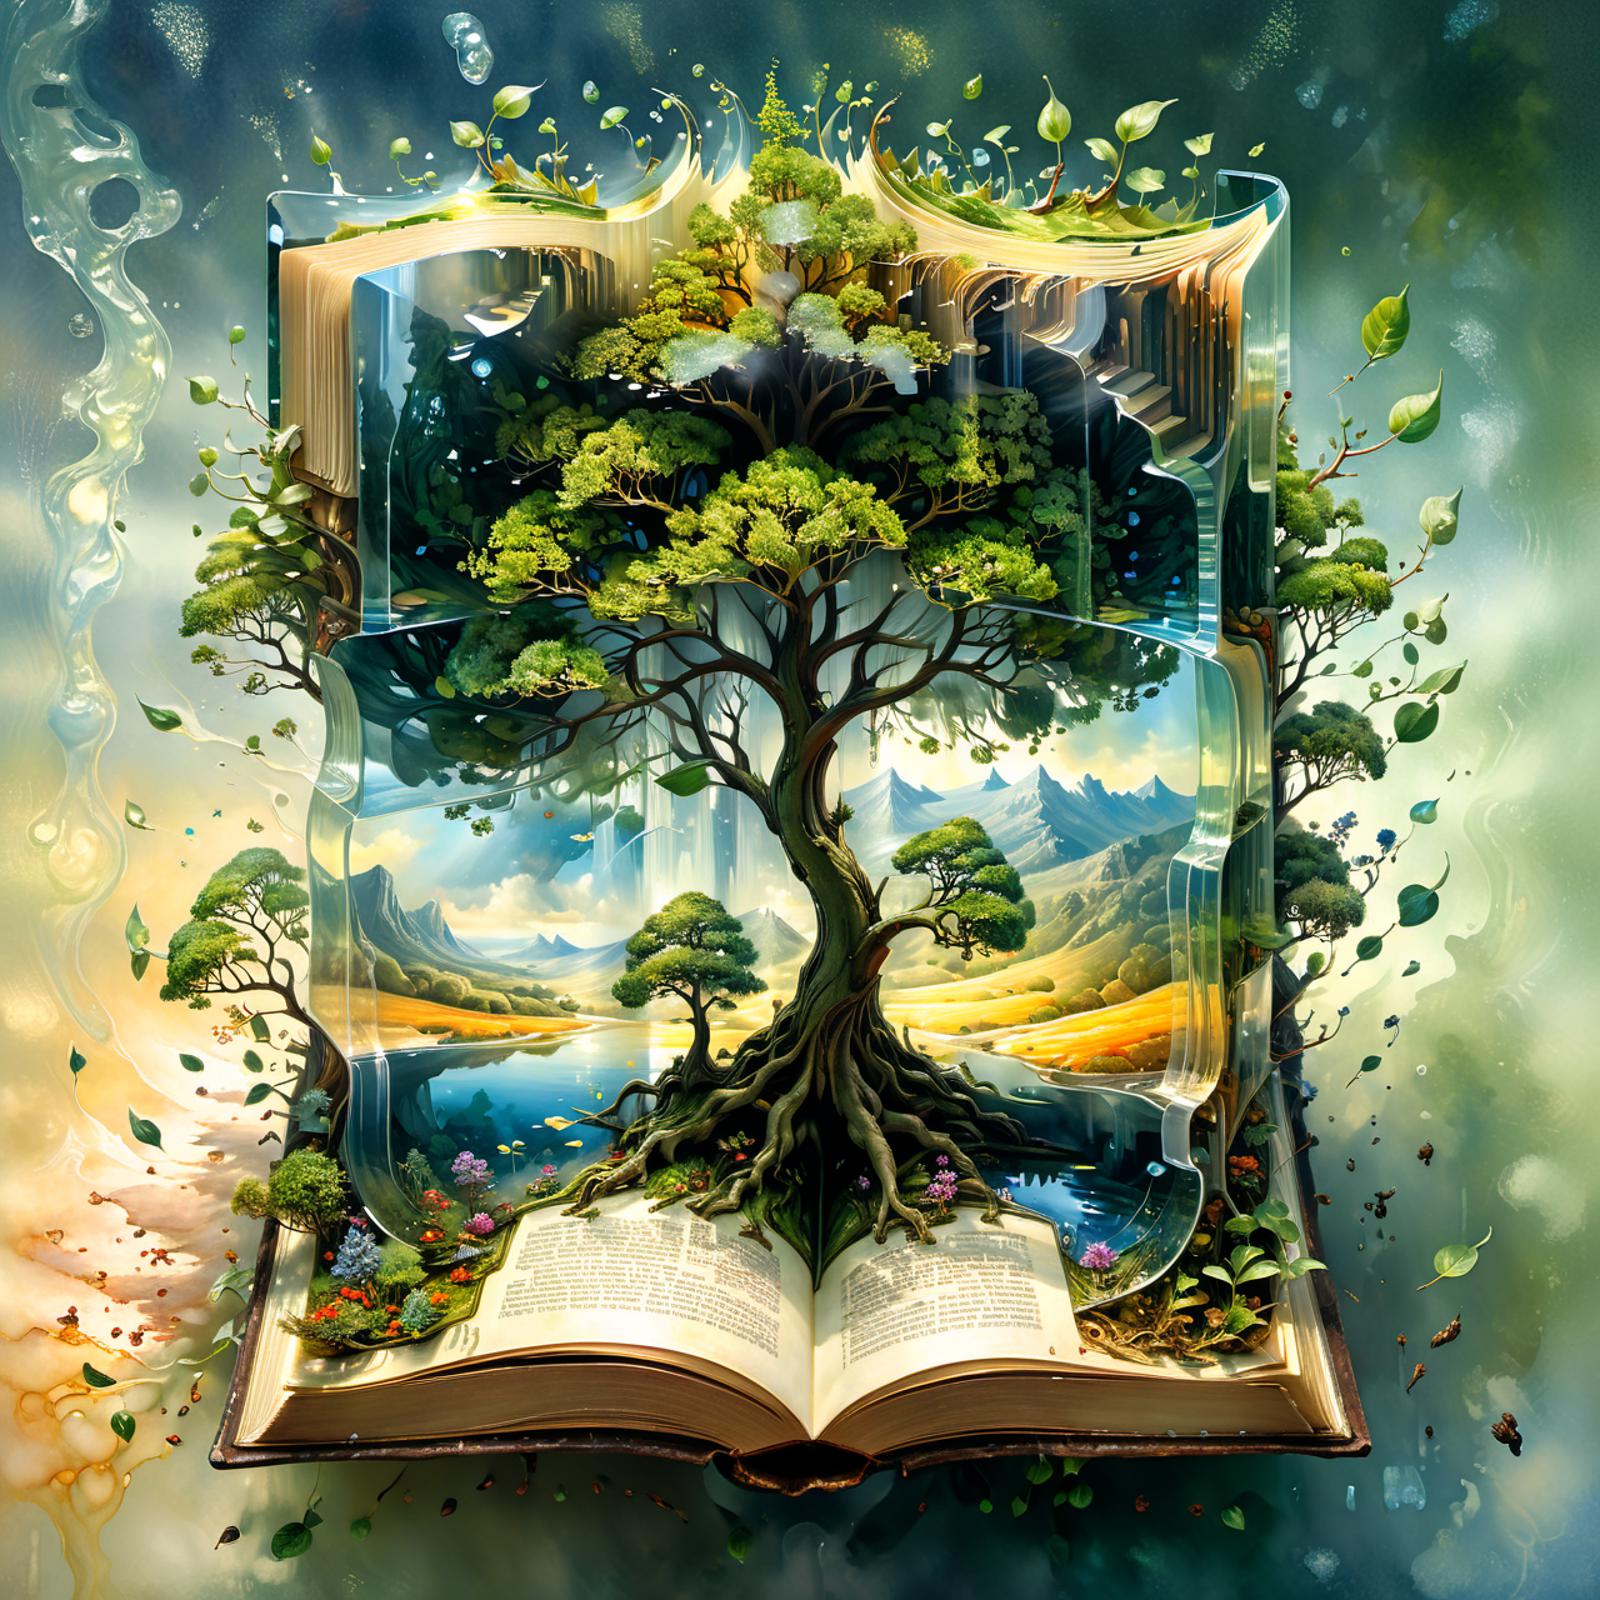 Book with a tree growing out of it, with a vibrant color palette and a serene landscape.